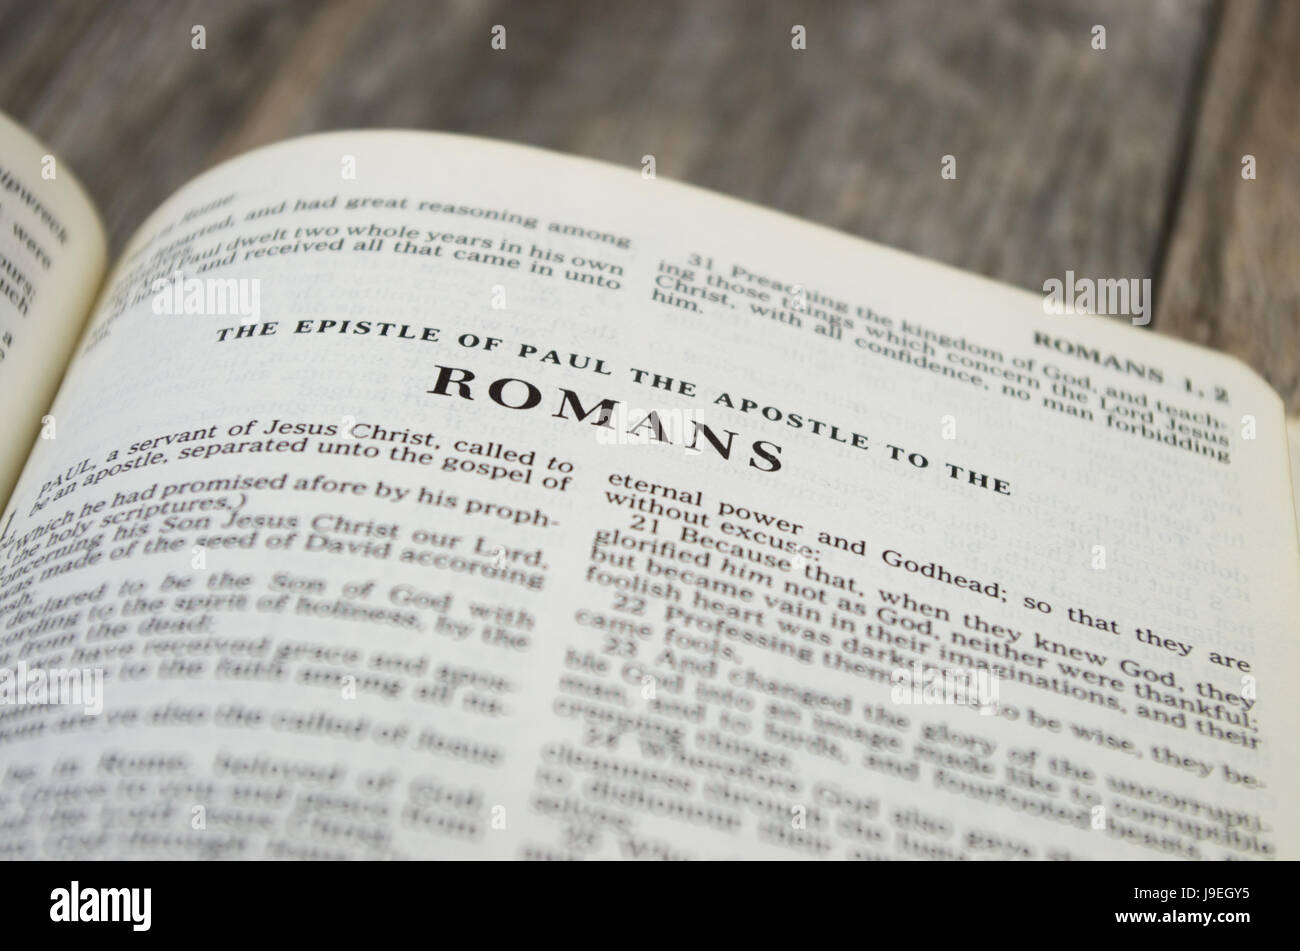 title-page-for-the-book-of-romans-in-the-bible-king-james-version